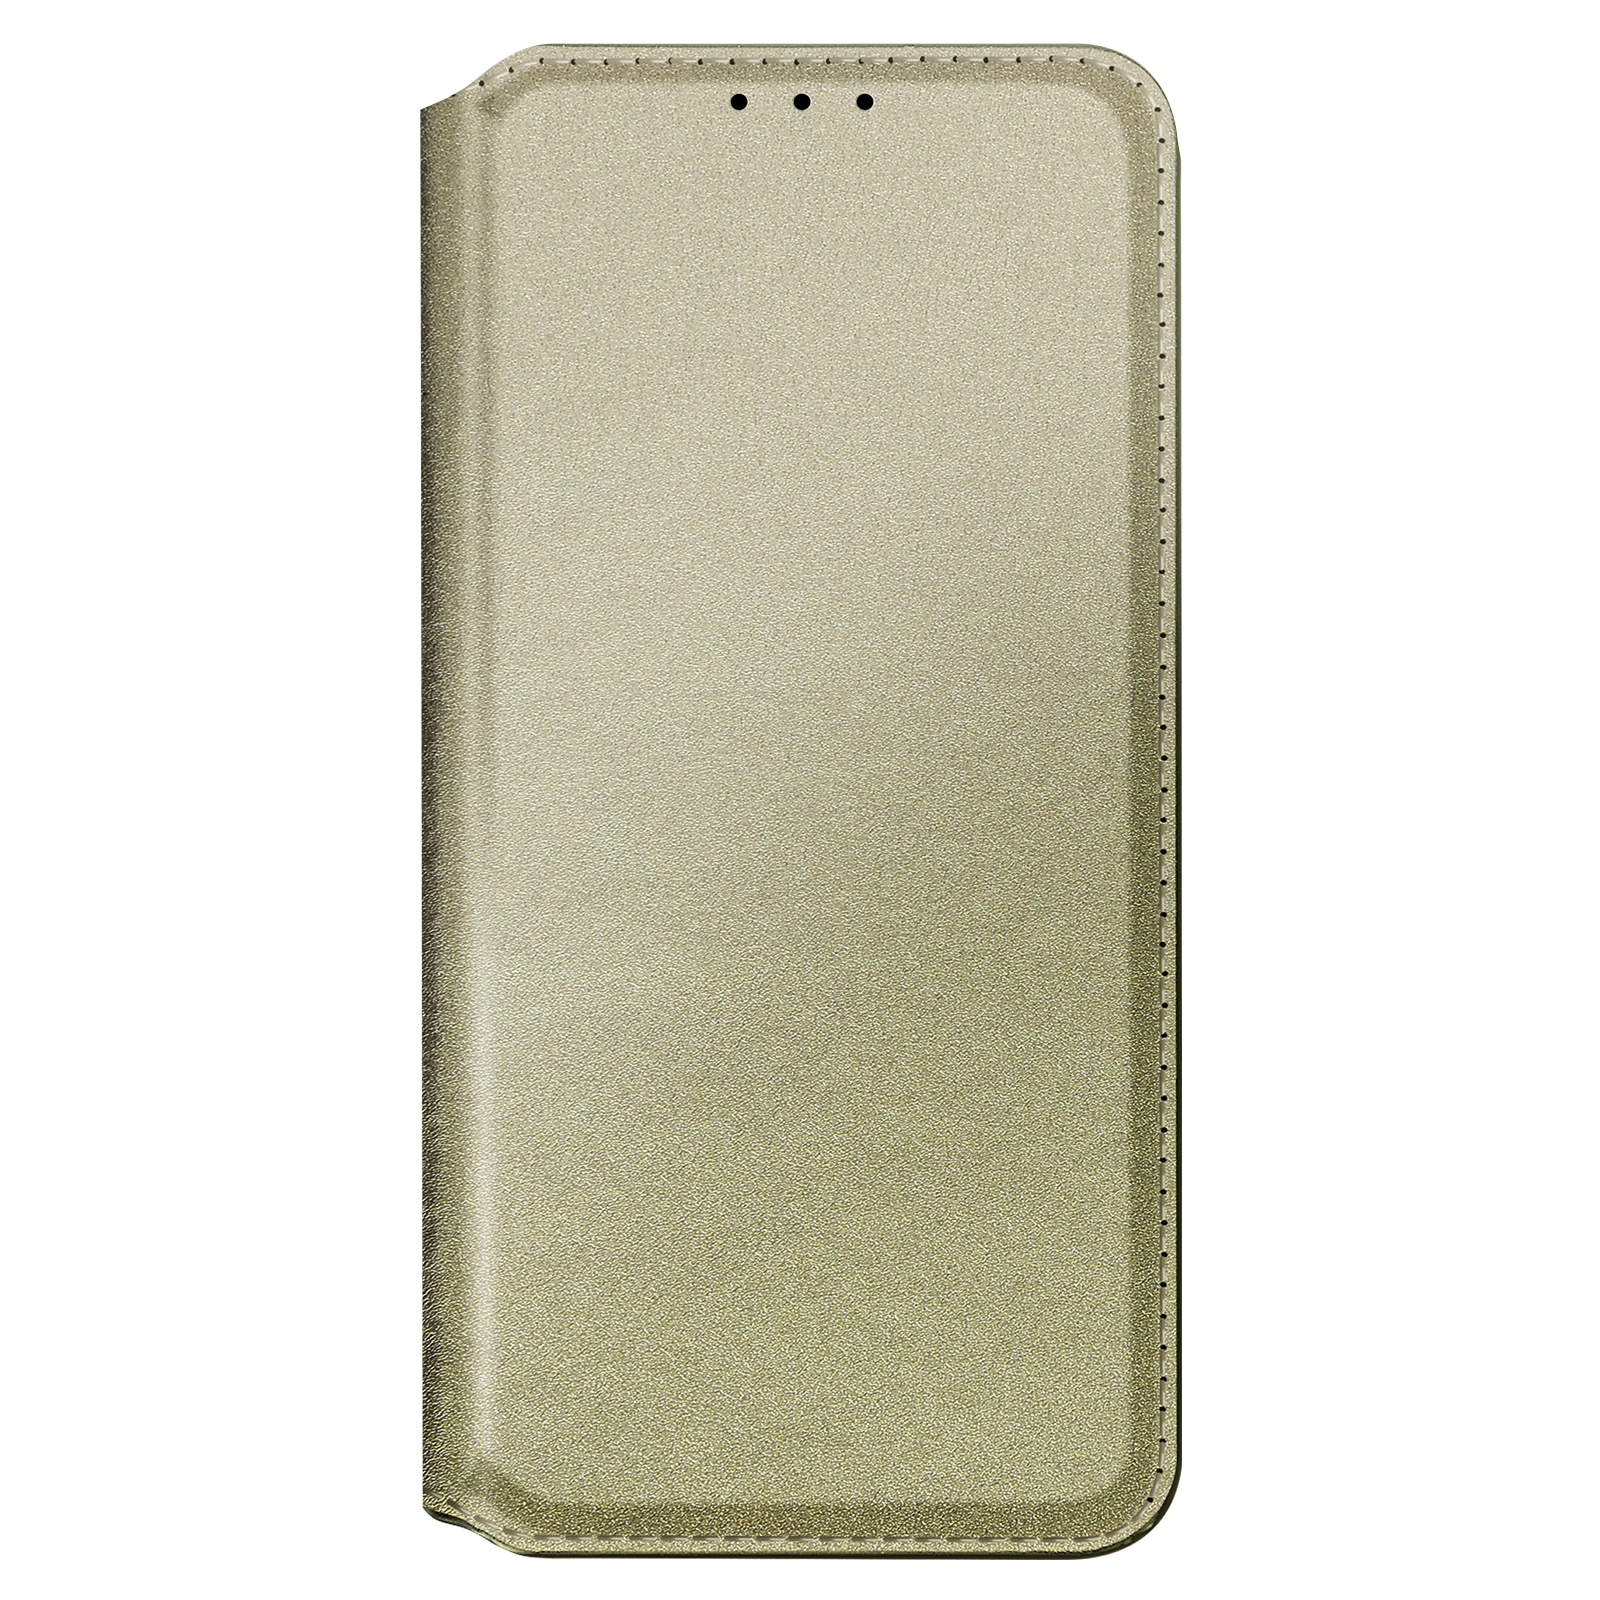 AVIZAR Classic Edition, Backcover Samsung, mit Galaxy 2018, Magnetklappe Gold A9 Series, Bookcover